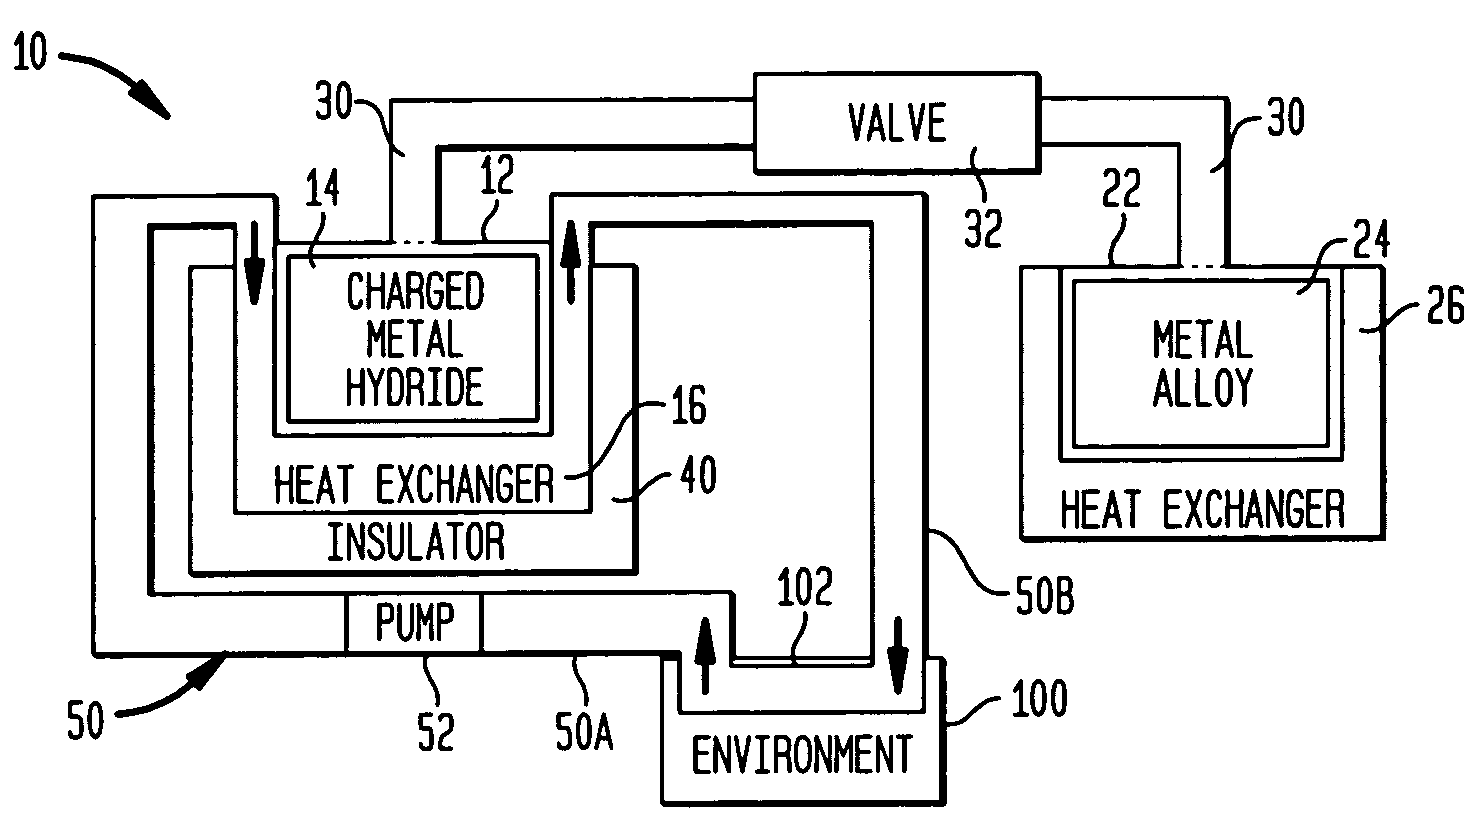 Reconfigurable hydrogen transfer heating/cooling system